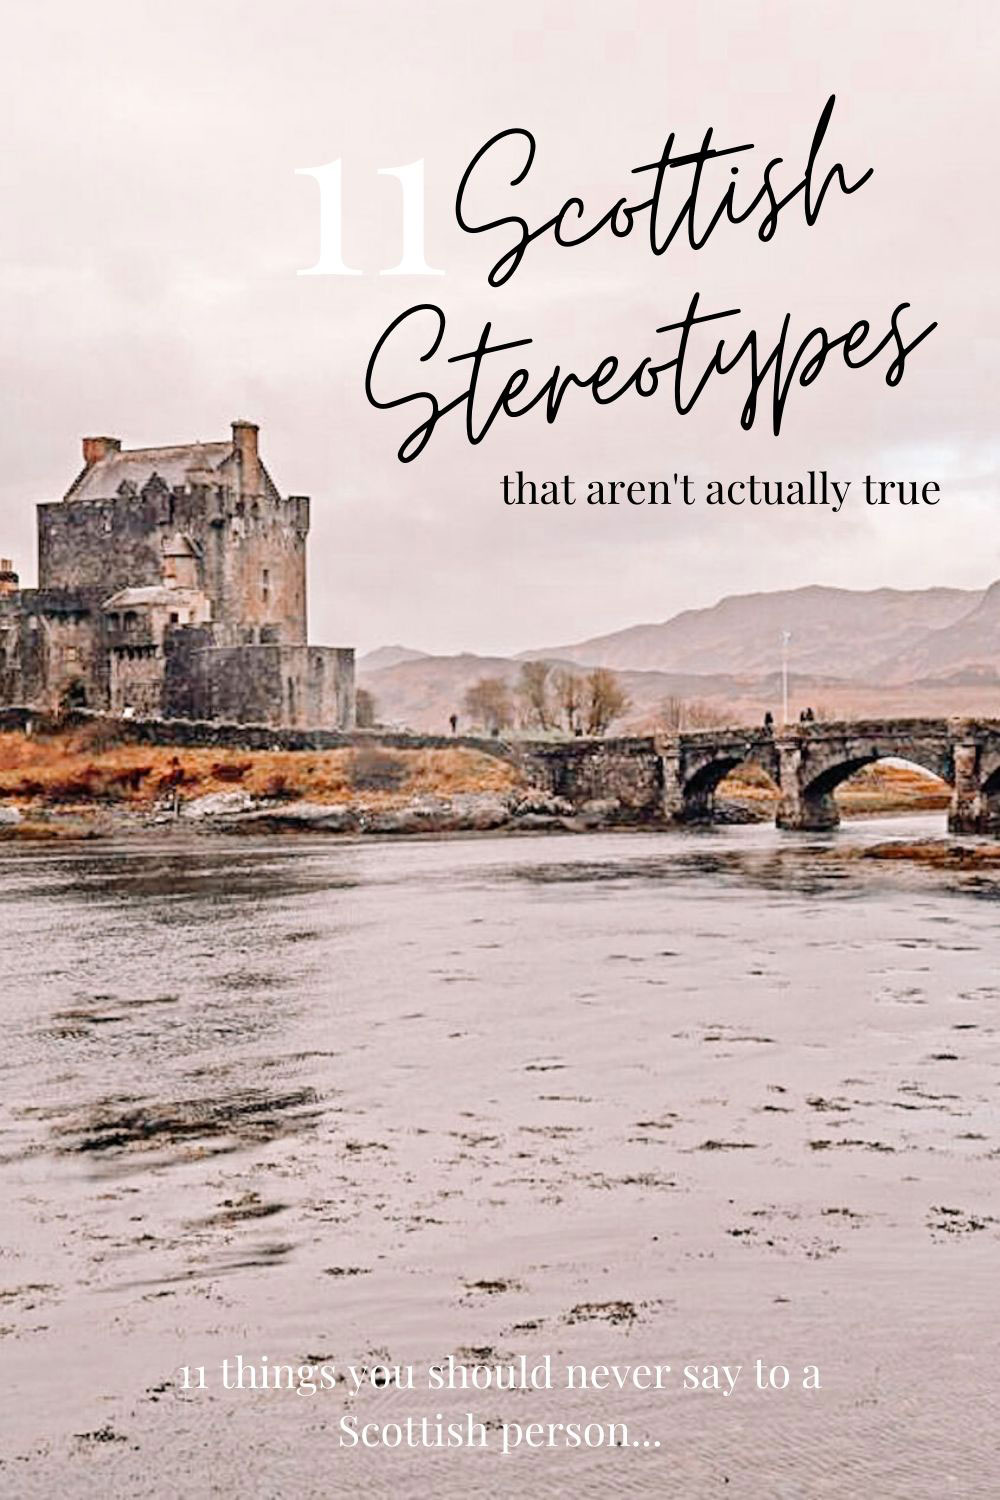 Scottish Stereotypes That Are Guaranteed To Annoy